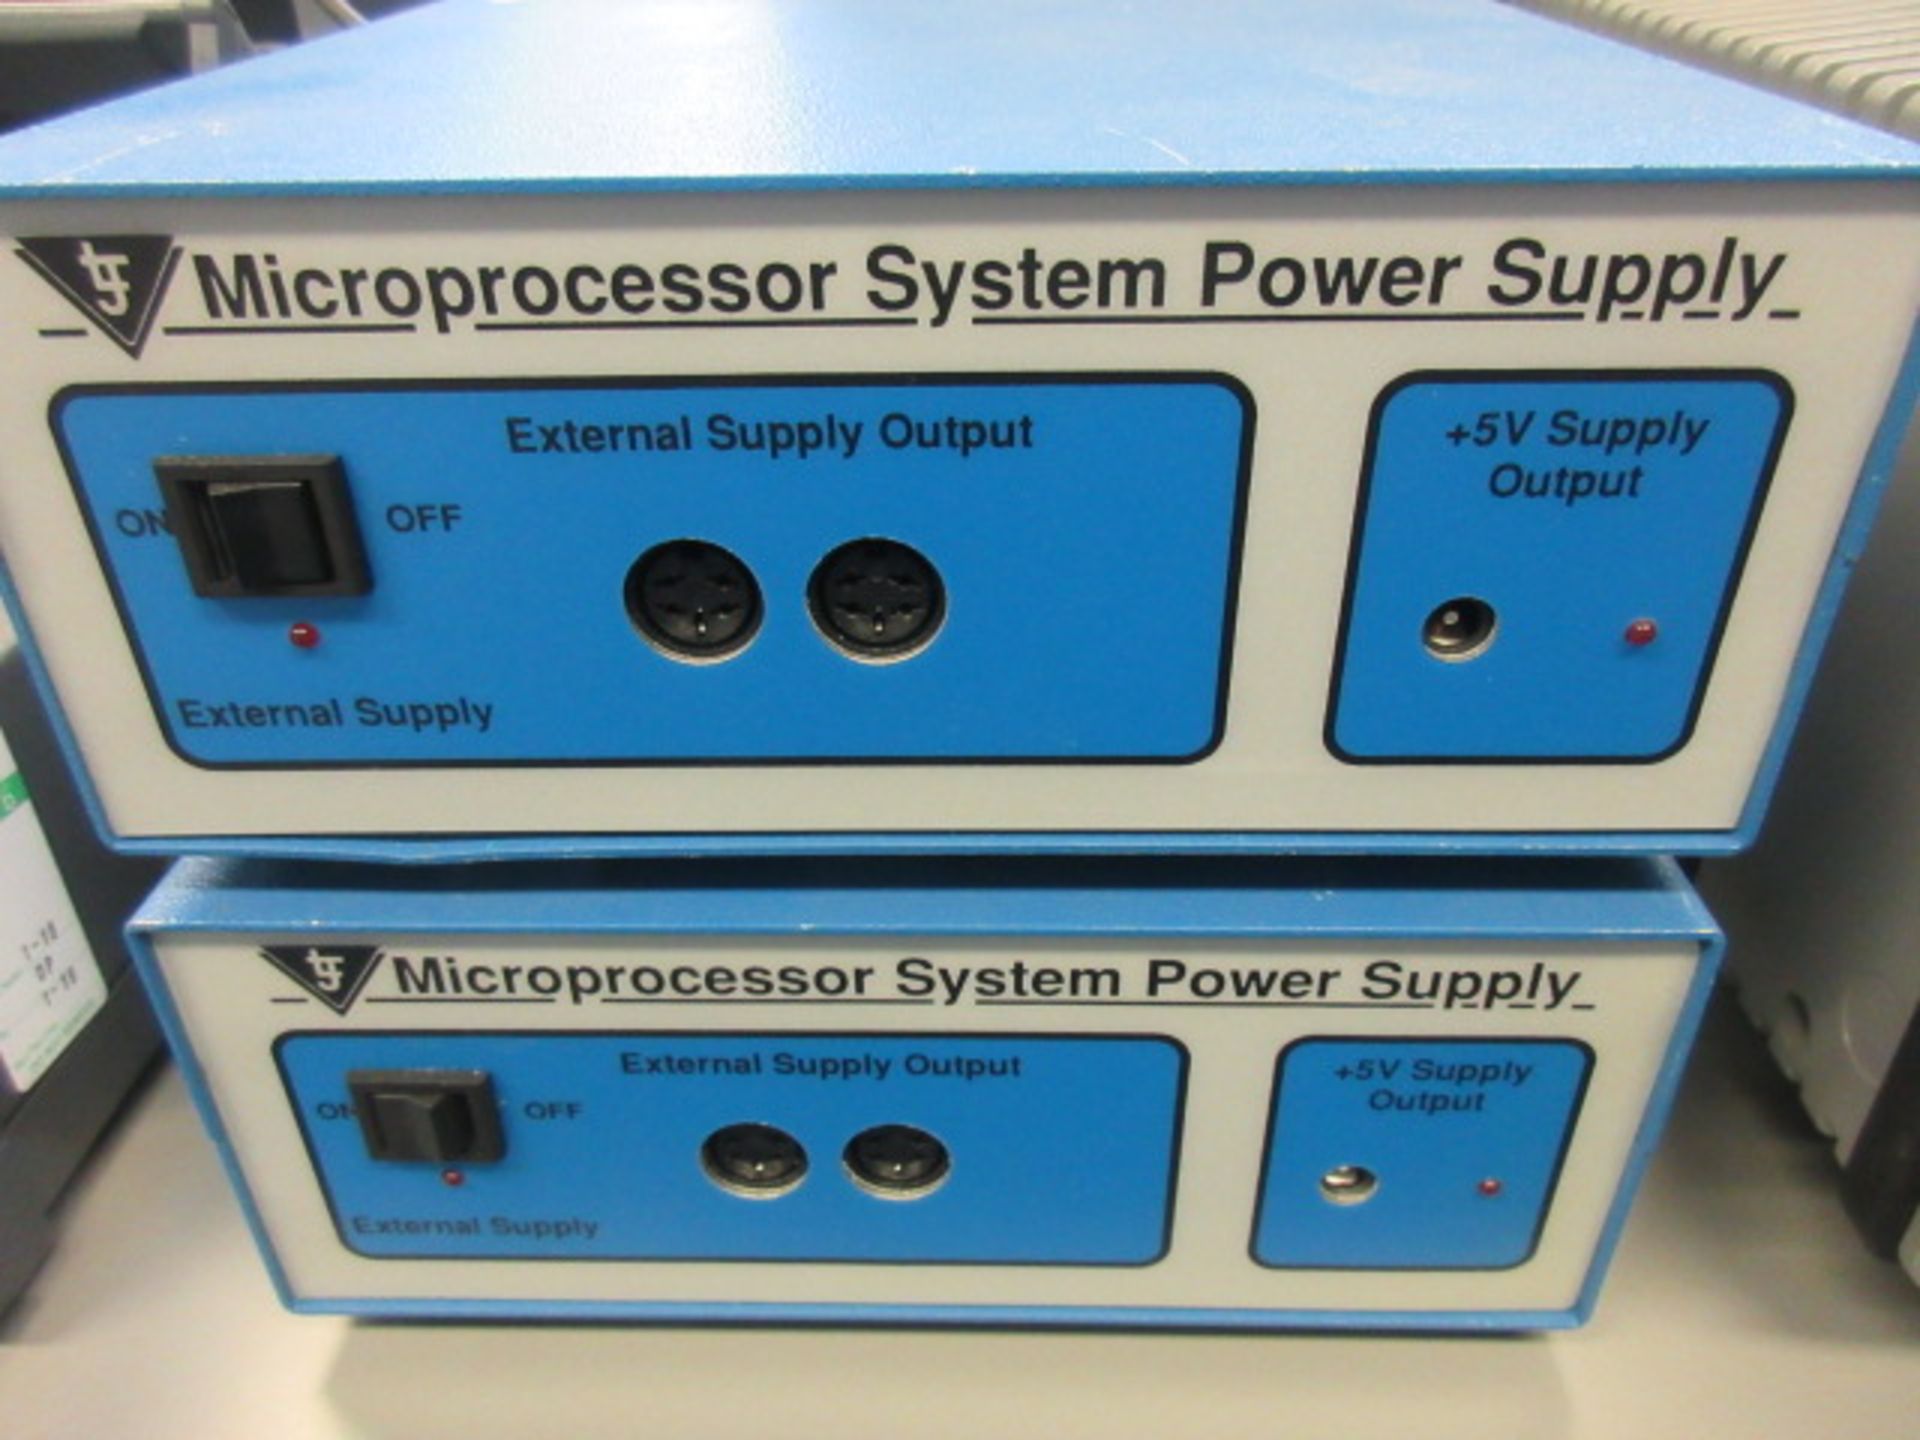 TWO MICROPROCESSOR SYSTEM POWER SUPPLYS